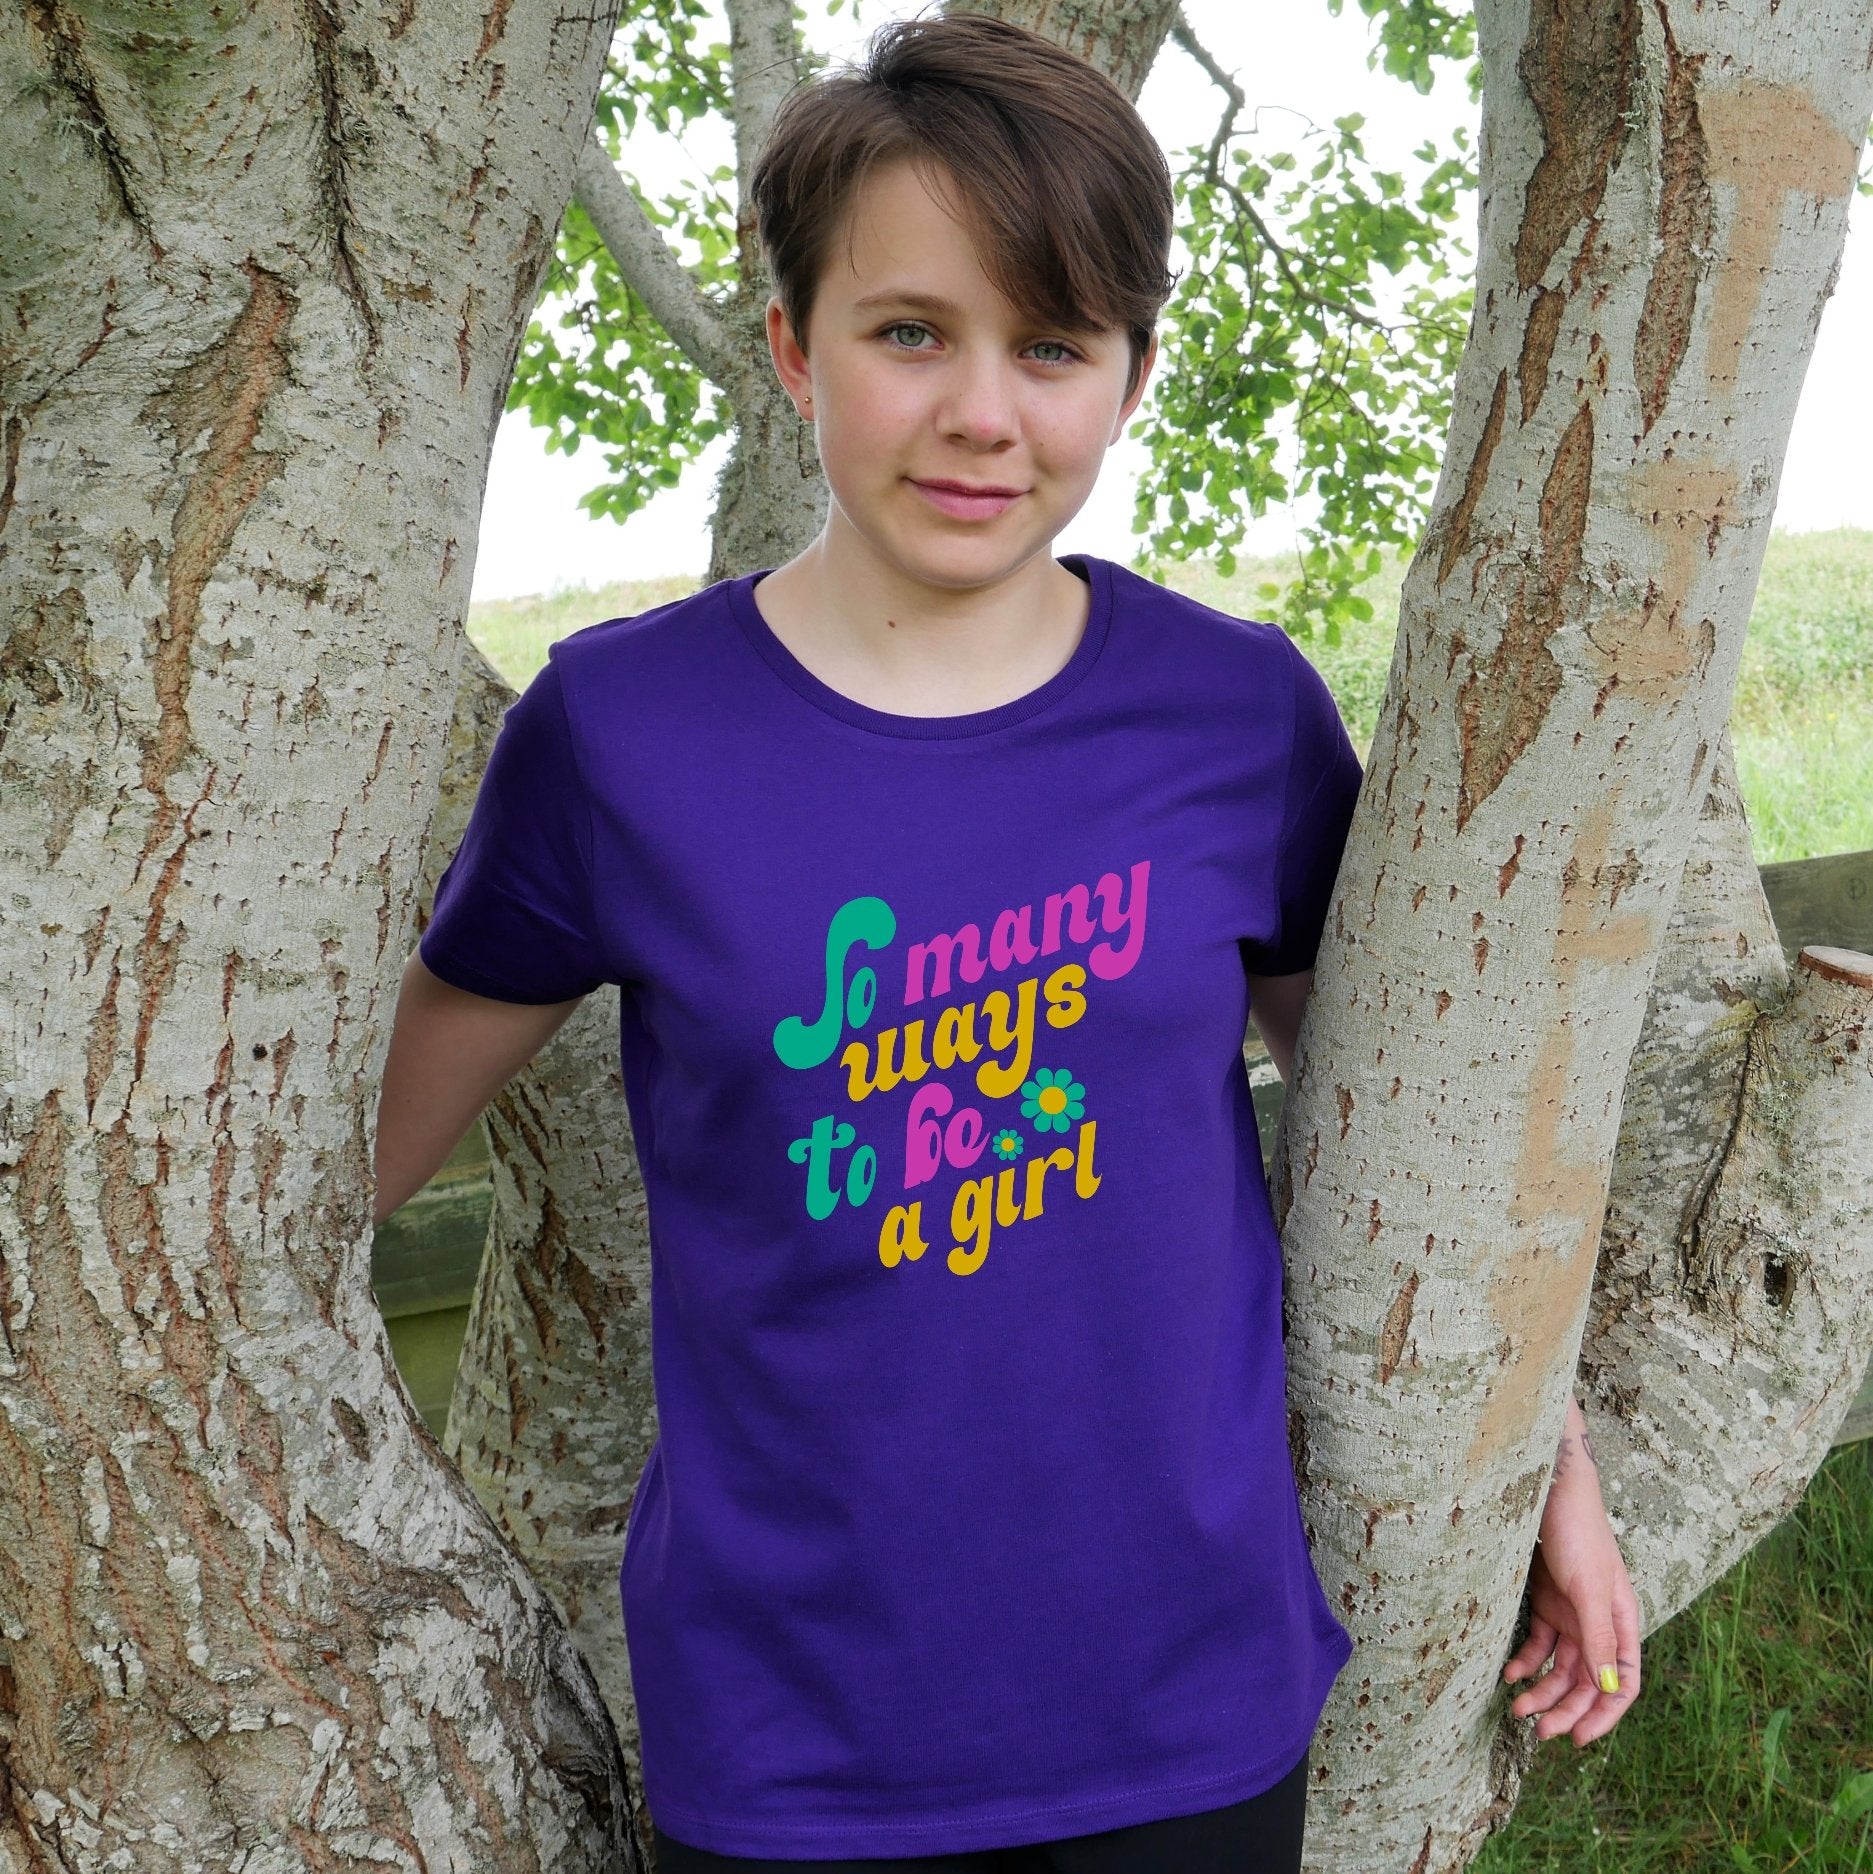 70s Vibe So Many Ways to be a Girl - Teens/Adults T-Shirt - Scarf Monkey